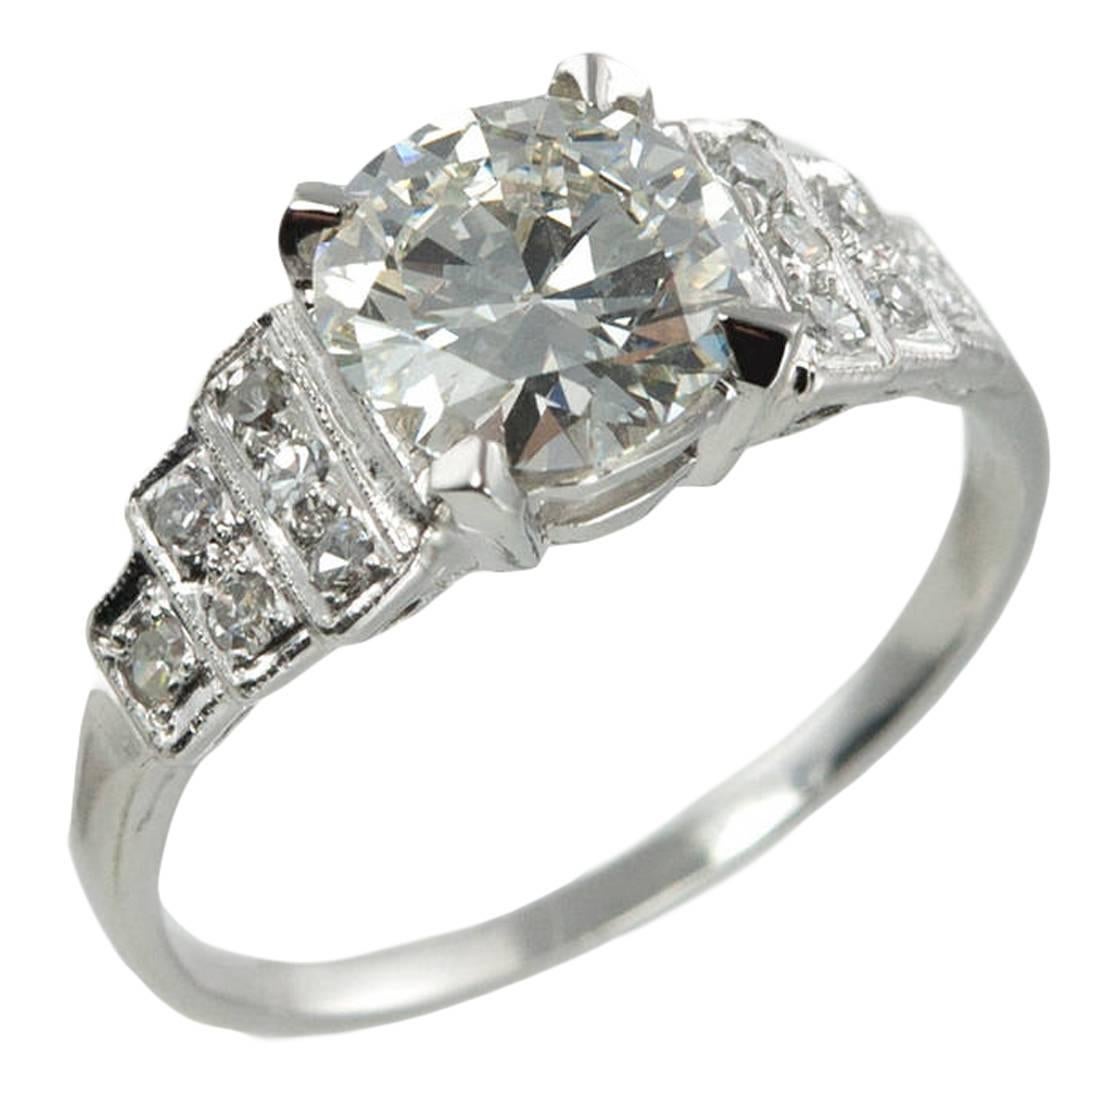 1.31 Carat Diamond Platinum Ring with Step Mounting For Sale